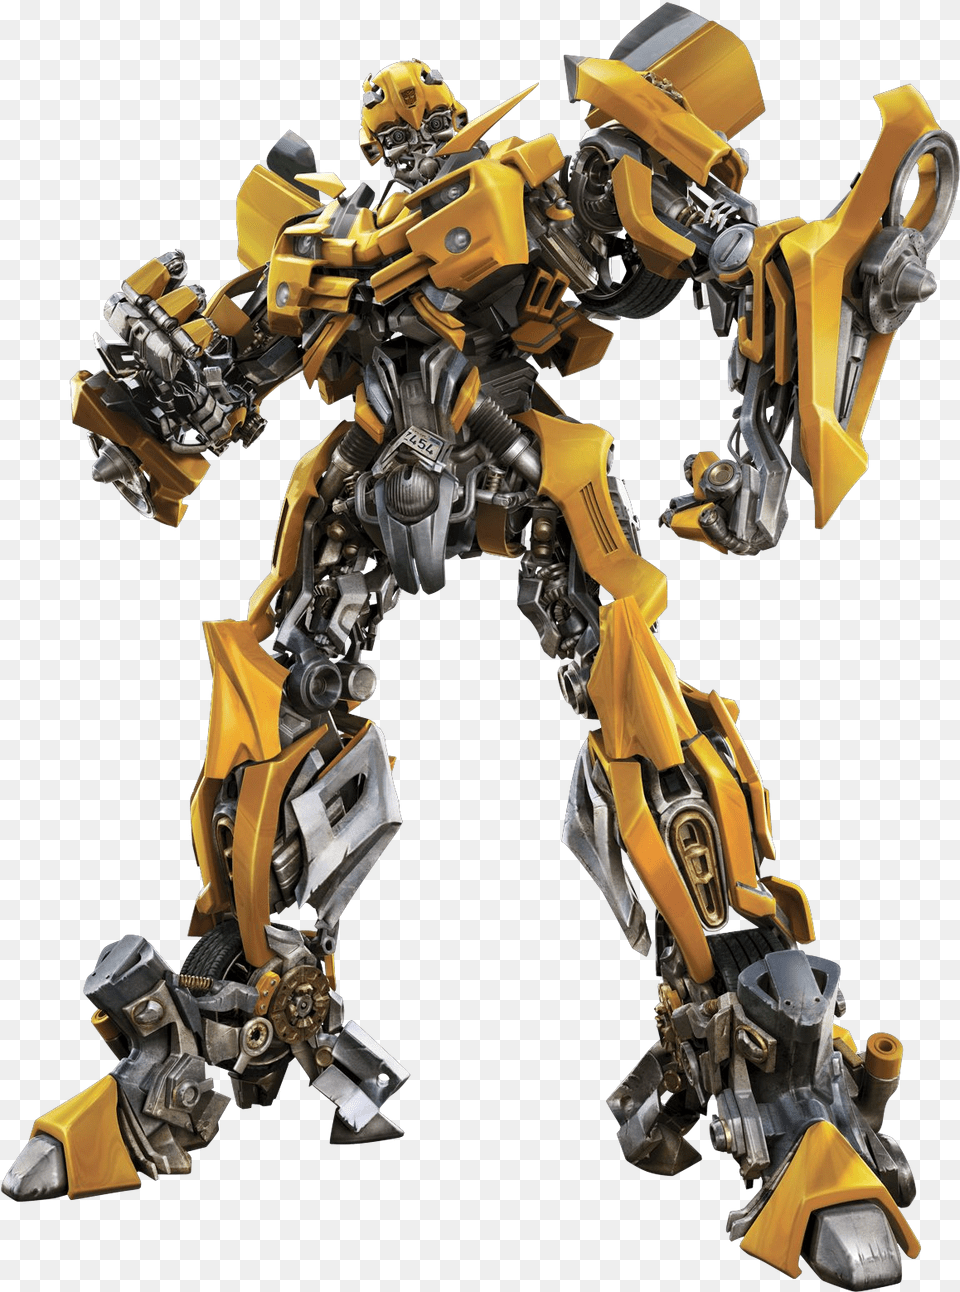 Download Bumble Bee Transformer, Animal, Apidae, Bumblebee, Insect Free Png